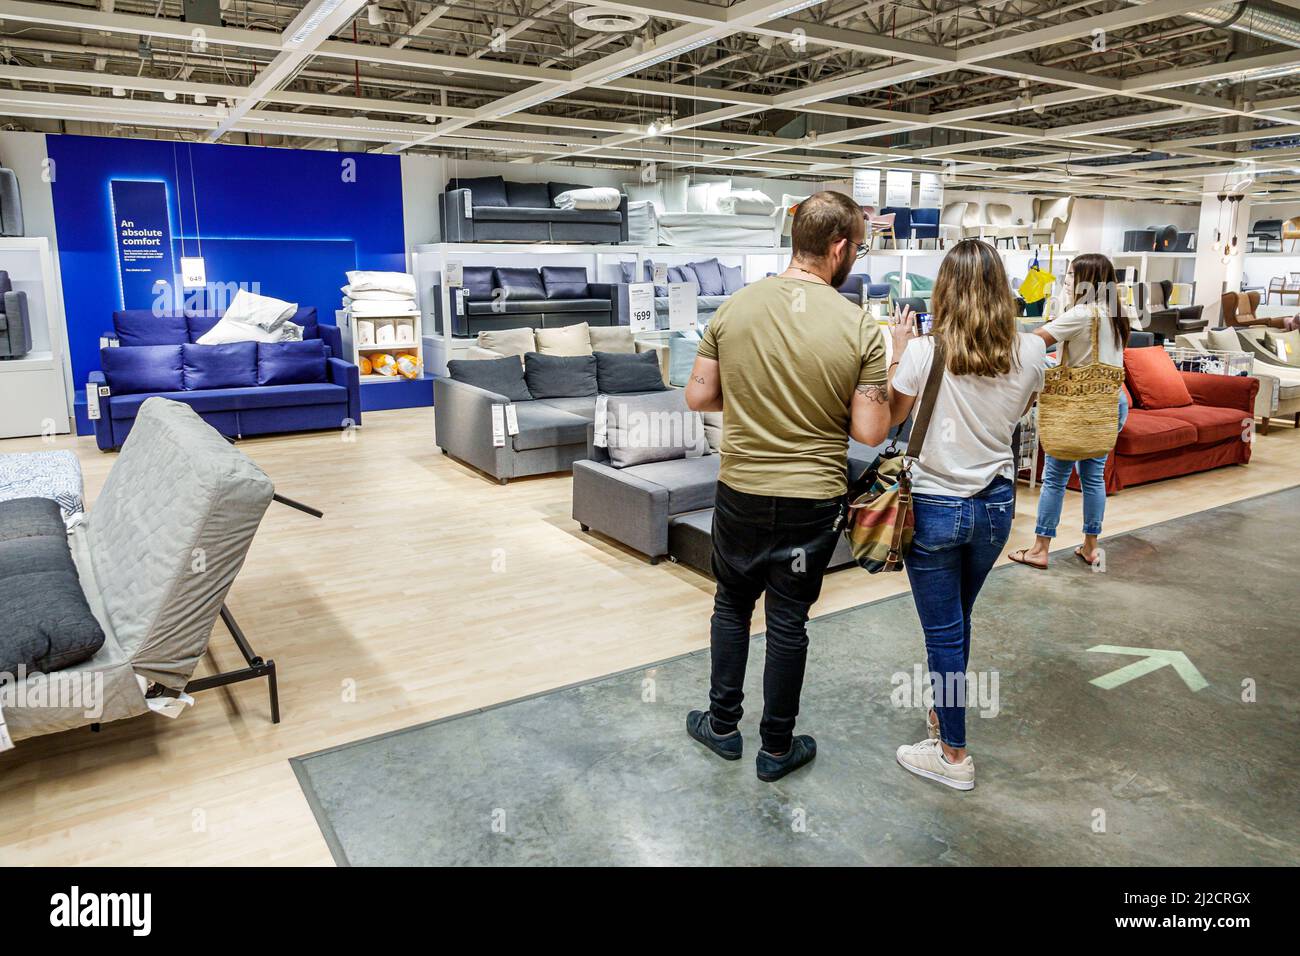 Miami Florida IKEA home goods furnishings accessories furniture decor shopping shoppers inside interior display sale couple man woman looking Stock Photo